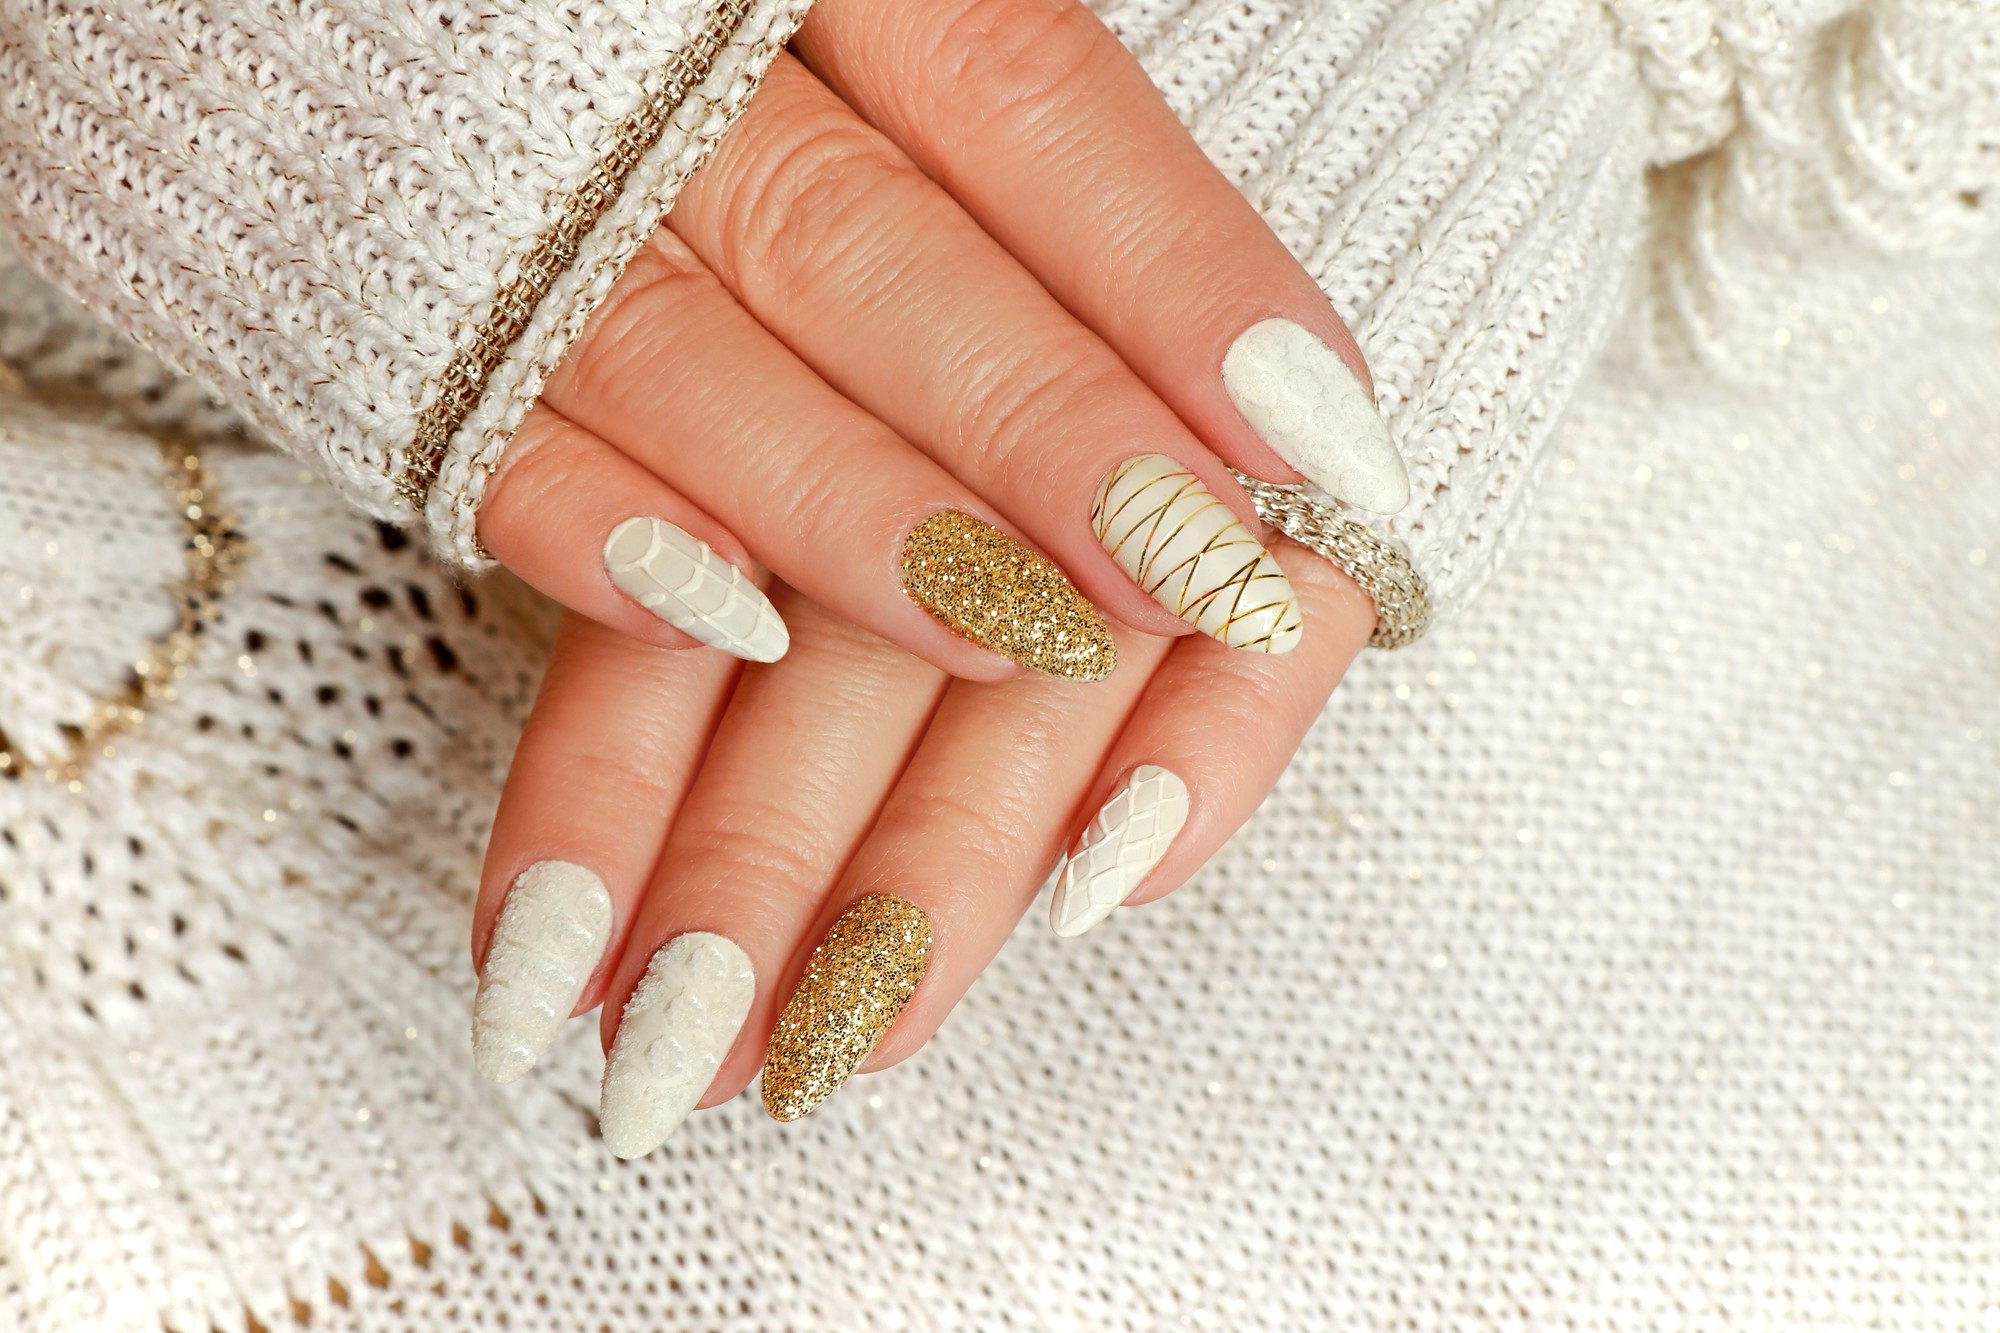 light-manicure-with-sand-golden-highlights (1)